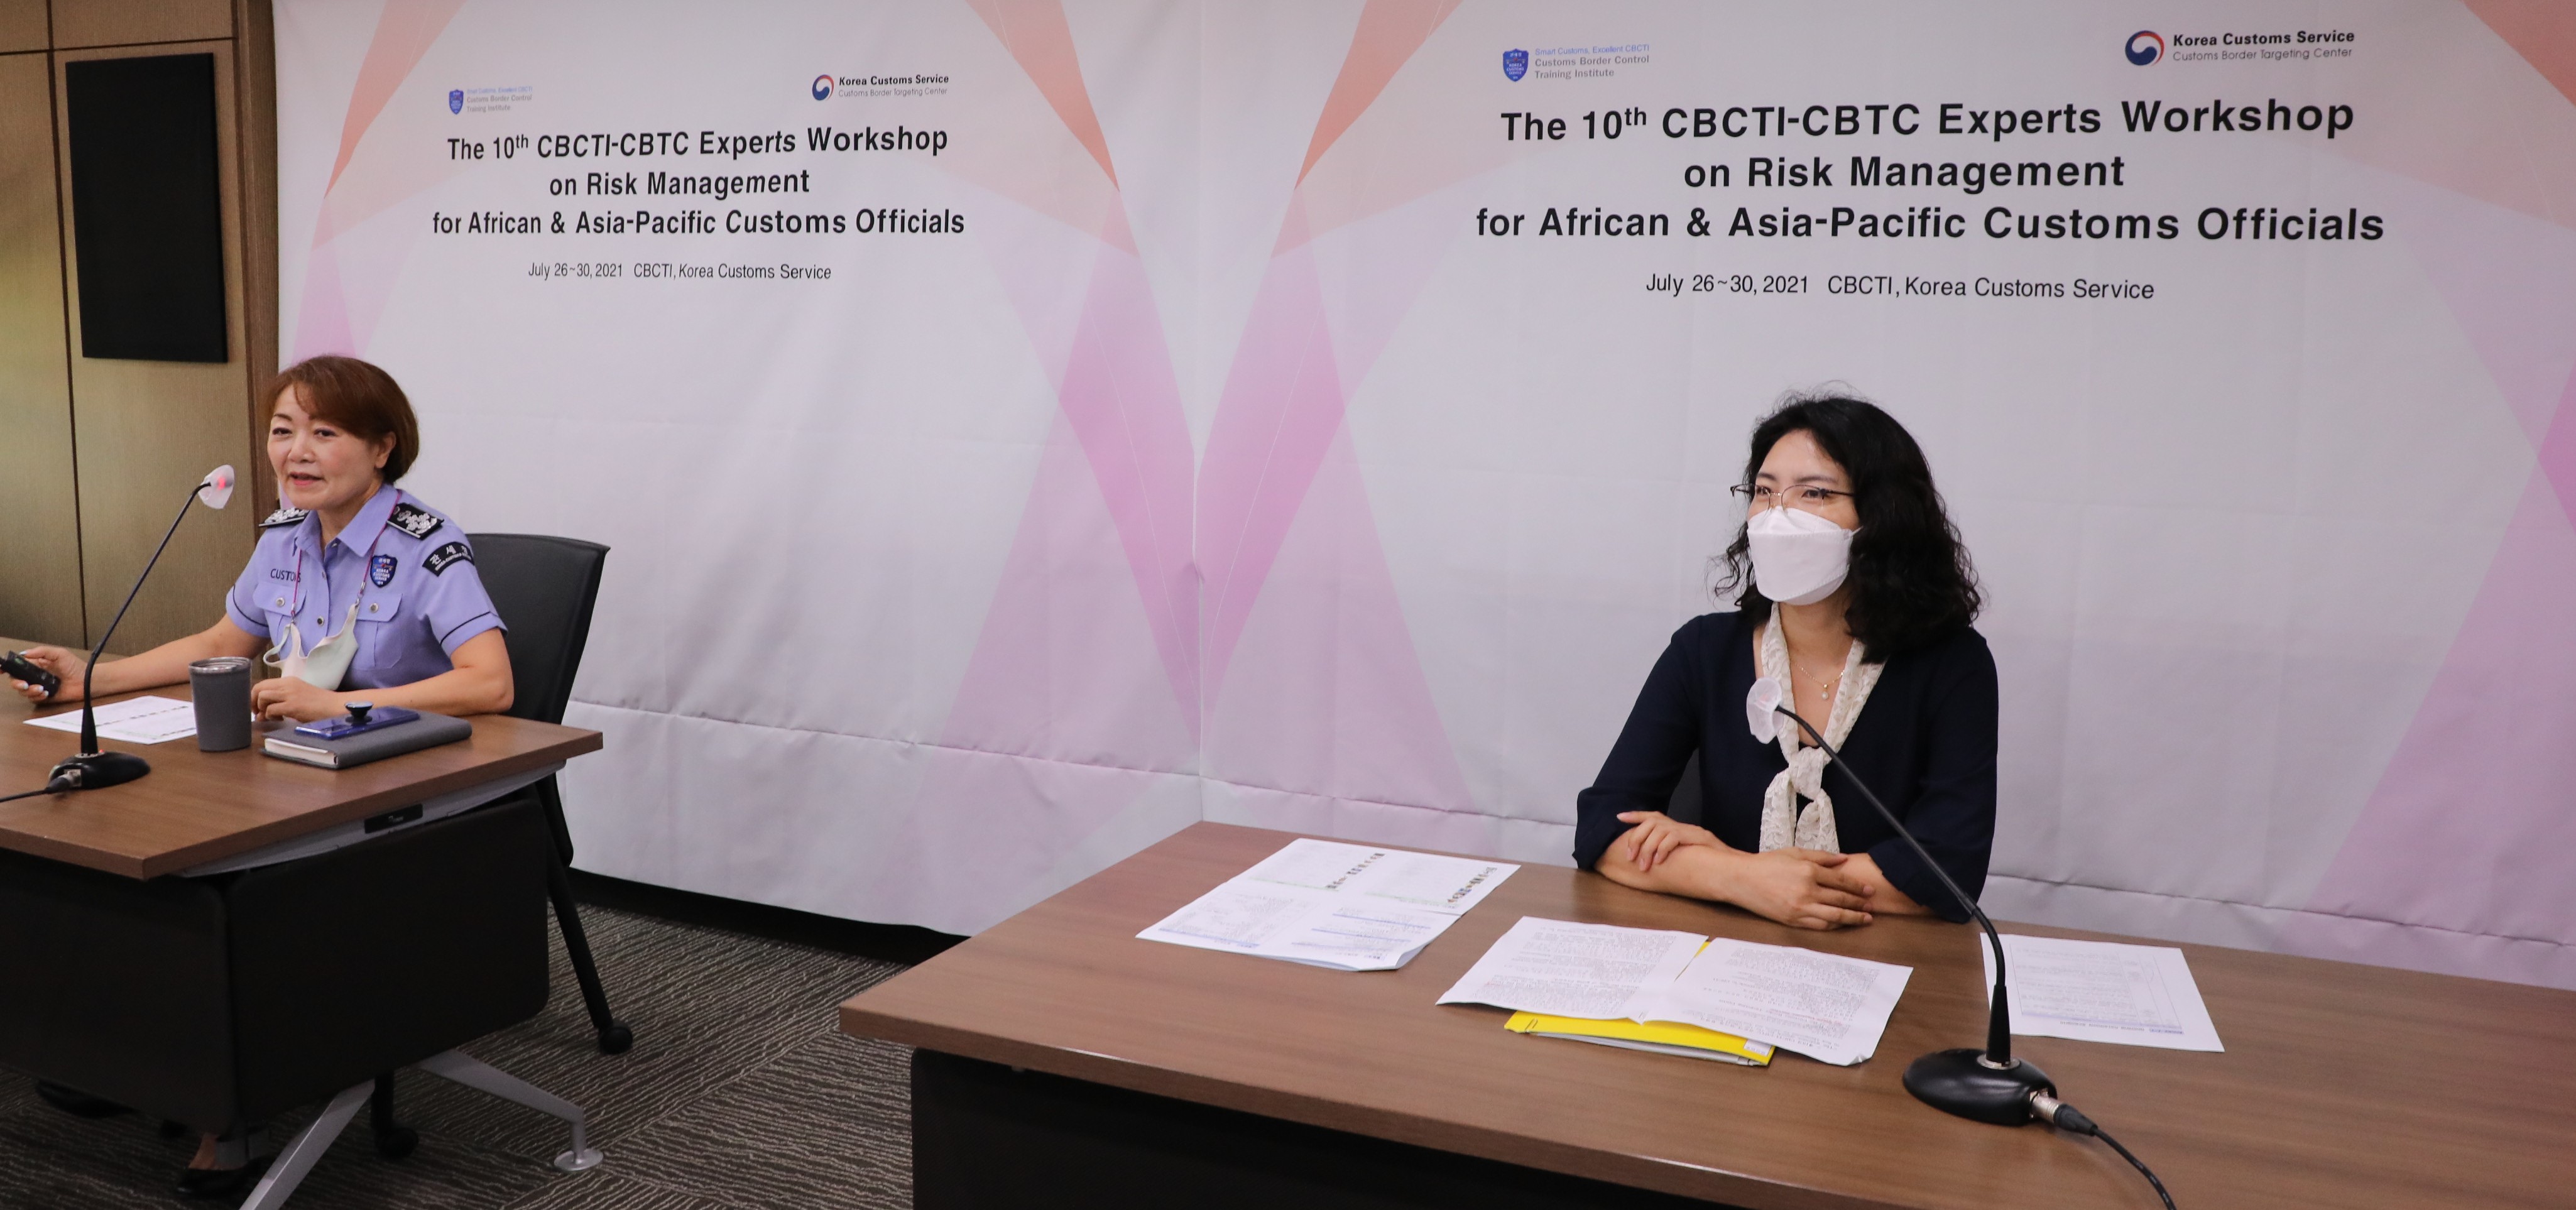 The 10th CBCTI-CBTC Experts Workshop on Risk Management for African & Asia-Pacific Customs Officials